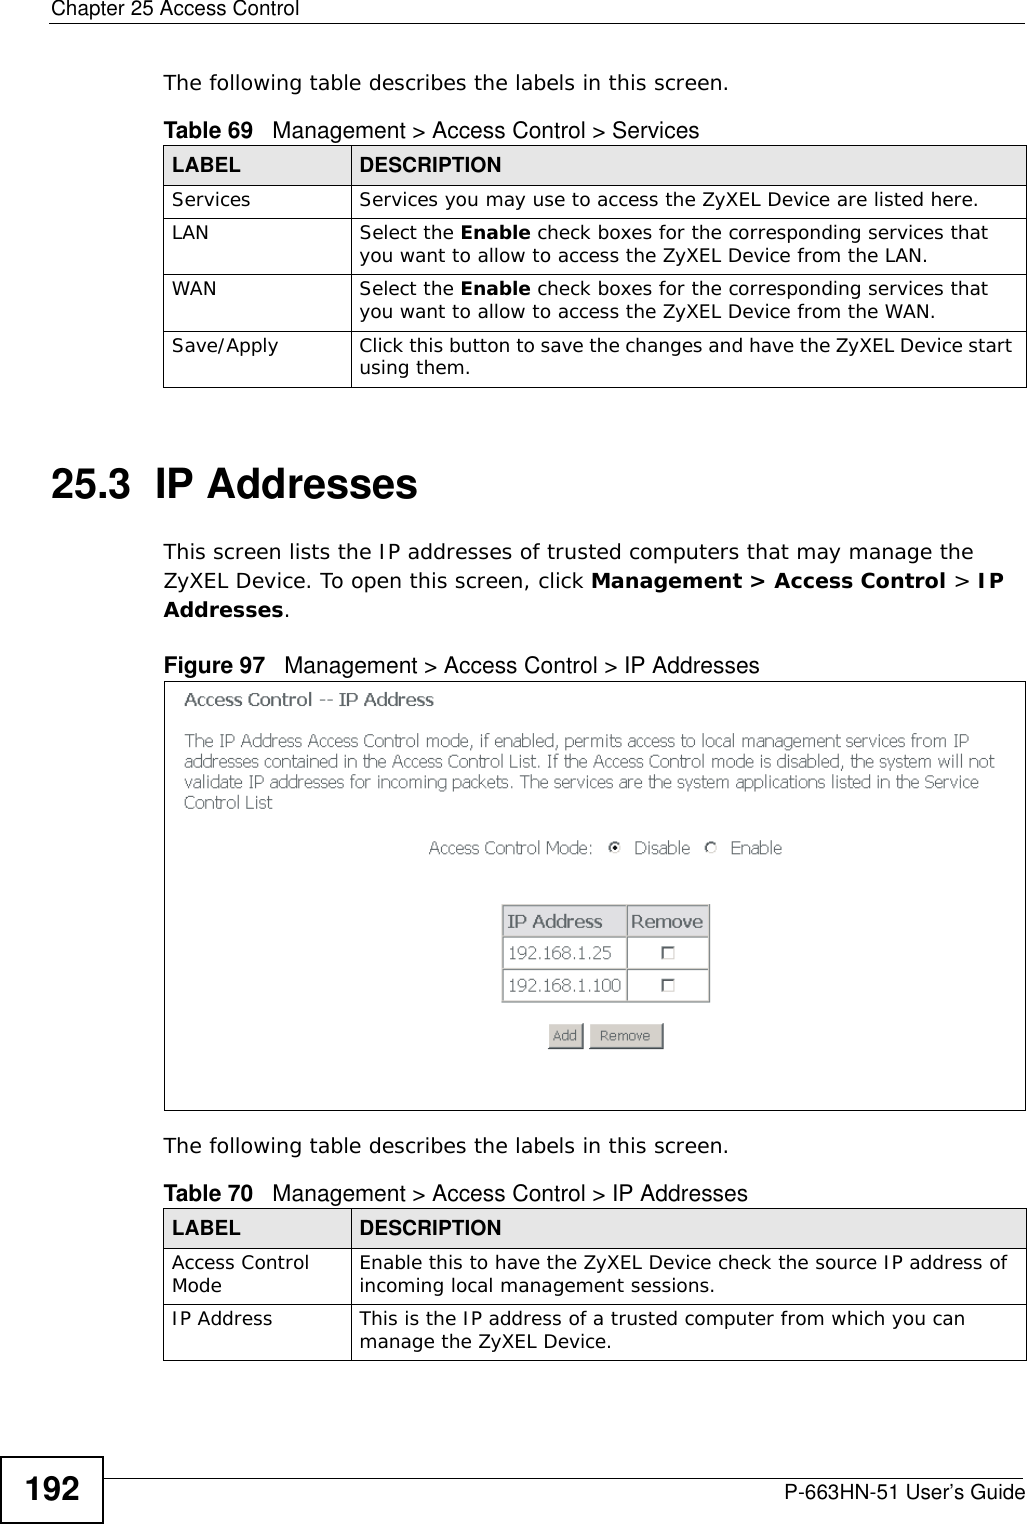 Chapter 25 Access ControlP-663HN-51 User’s Guide192The following table describes the labels in this screen.25.3  IP AddressesThis screen lists the IP addresses of trusted computers that may manage the ZyXEL Device. To open this screen, click Management &gt; Access Control &gt; IP Addresses.Figure 97   Management &gt; Access Control &gt; IP AddressesThe following table describes the labels in this screen.Table 69   Management &gt; Access Control &gt; ServicesLABEL DESCRIPTIONServices Services you may use to access the ZyXEL Device are listed here.LAN Select the Enable check boxes for the corresponding services that you want to allow to access the ZyXEL Device from the LAN.WAN Select the Enable check boxes for the corresponding services that you want to allow to access the ZyXEL Device from the WAN.Save/Apply Click this button to save the changes and have the ZyXEL Device start using them.Table 70   Management &gt; Access Control &gt; IP AddressesLABEL DESCRIPTIONAccess Control Mode Enable this to have the ZyXEL Device check the source IP address of incoming local management sessions.IP Address This is the IP address of a trusted computer from which you can manage the ZyXEL Device.